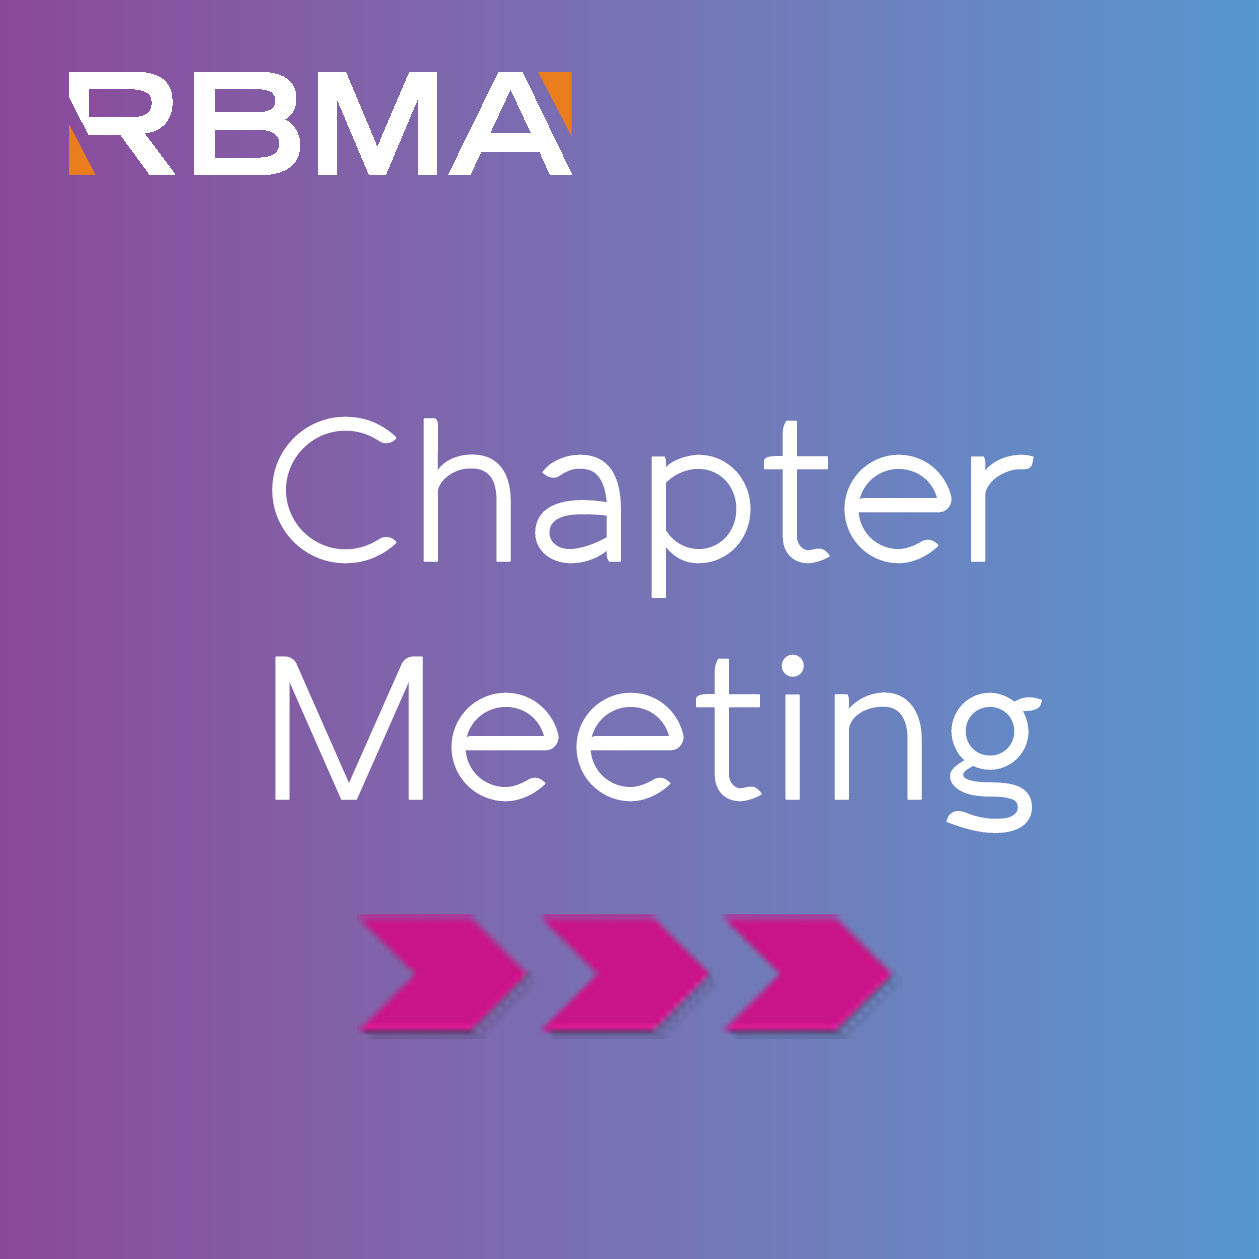 RBMA Tennessee Chapter 2022 Annual Meeting